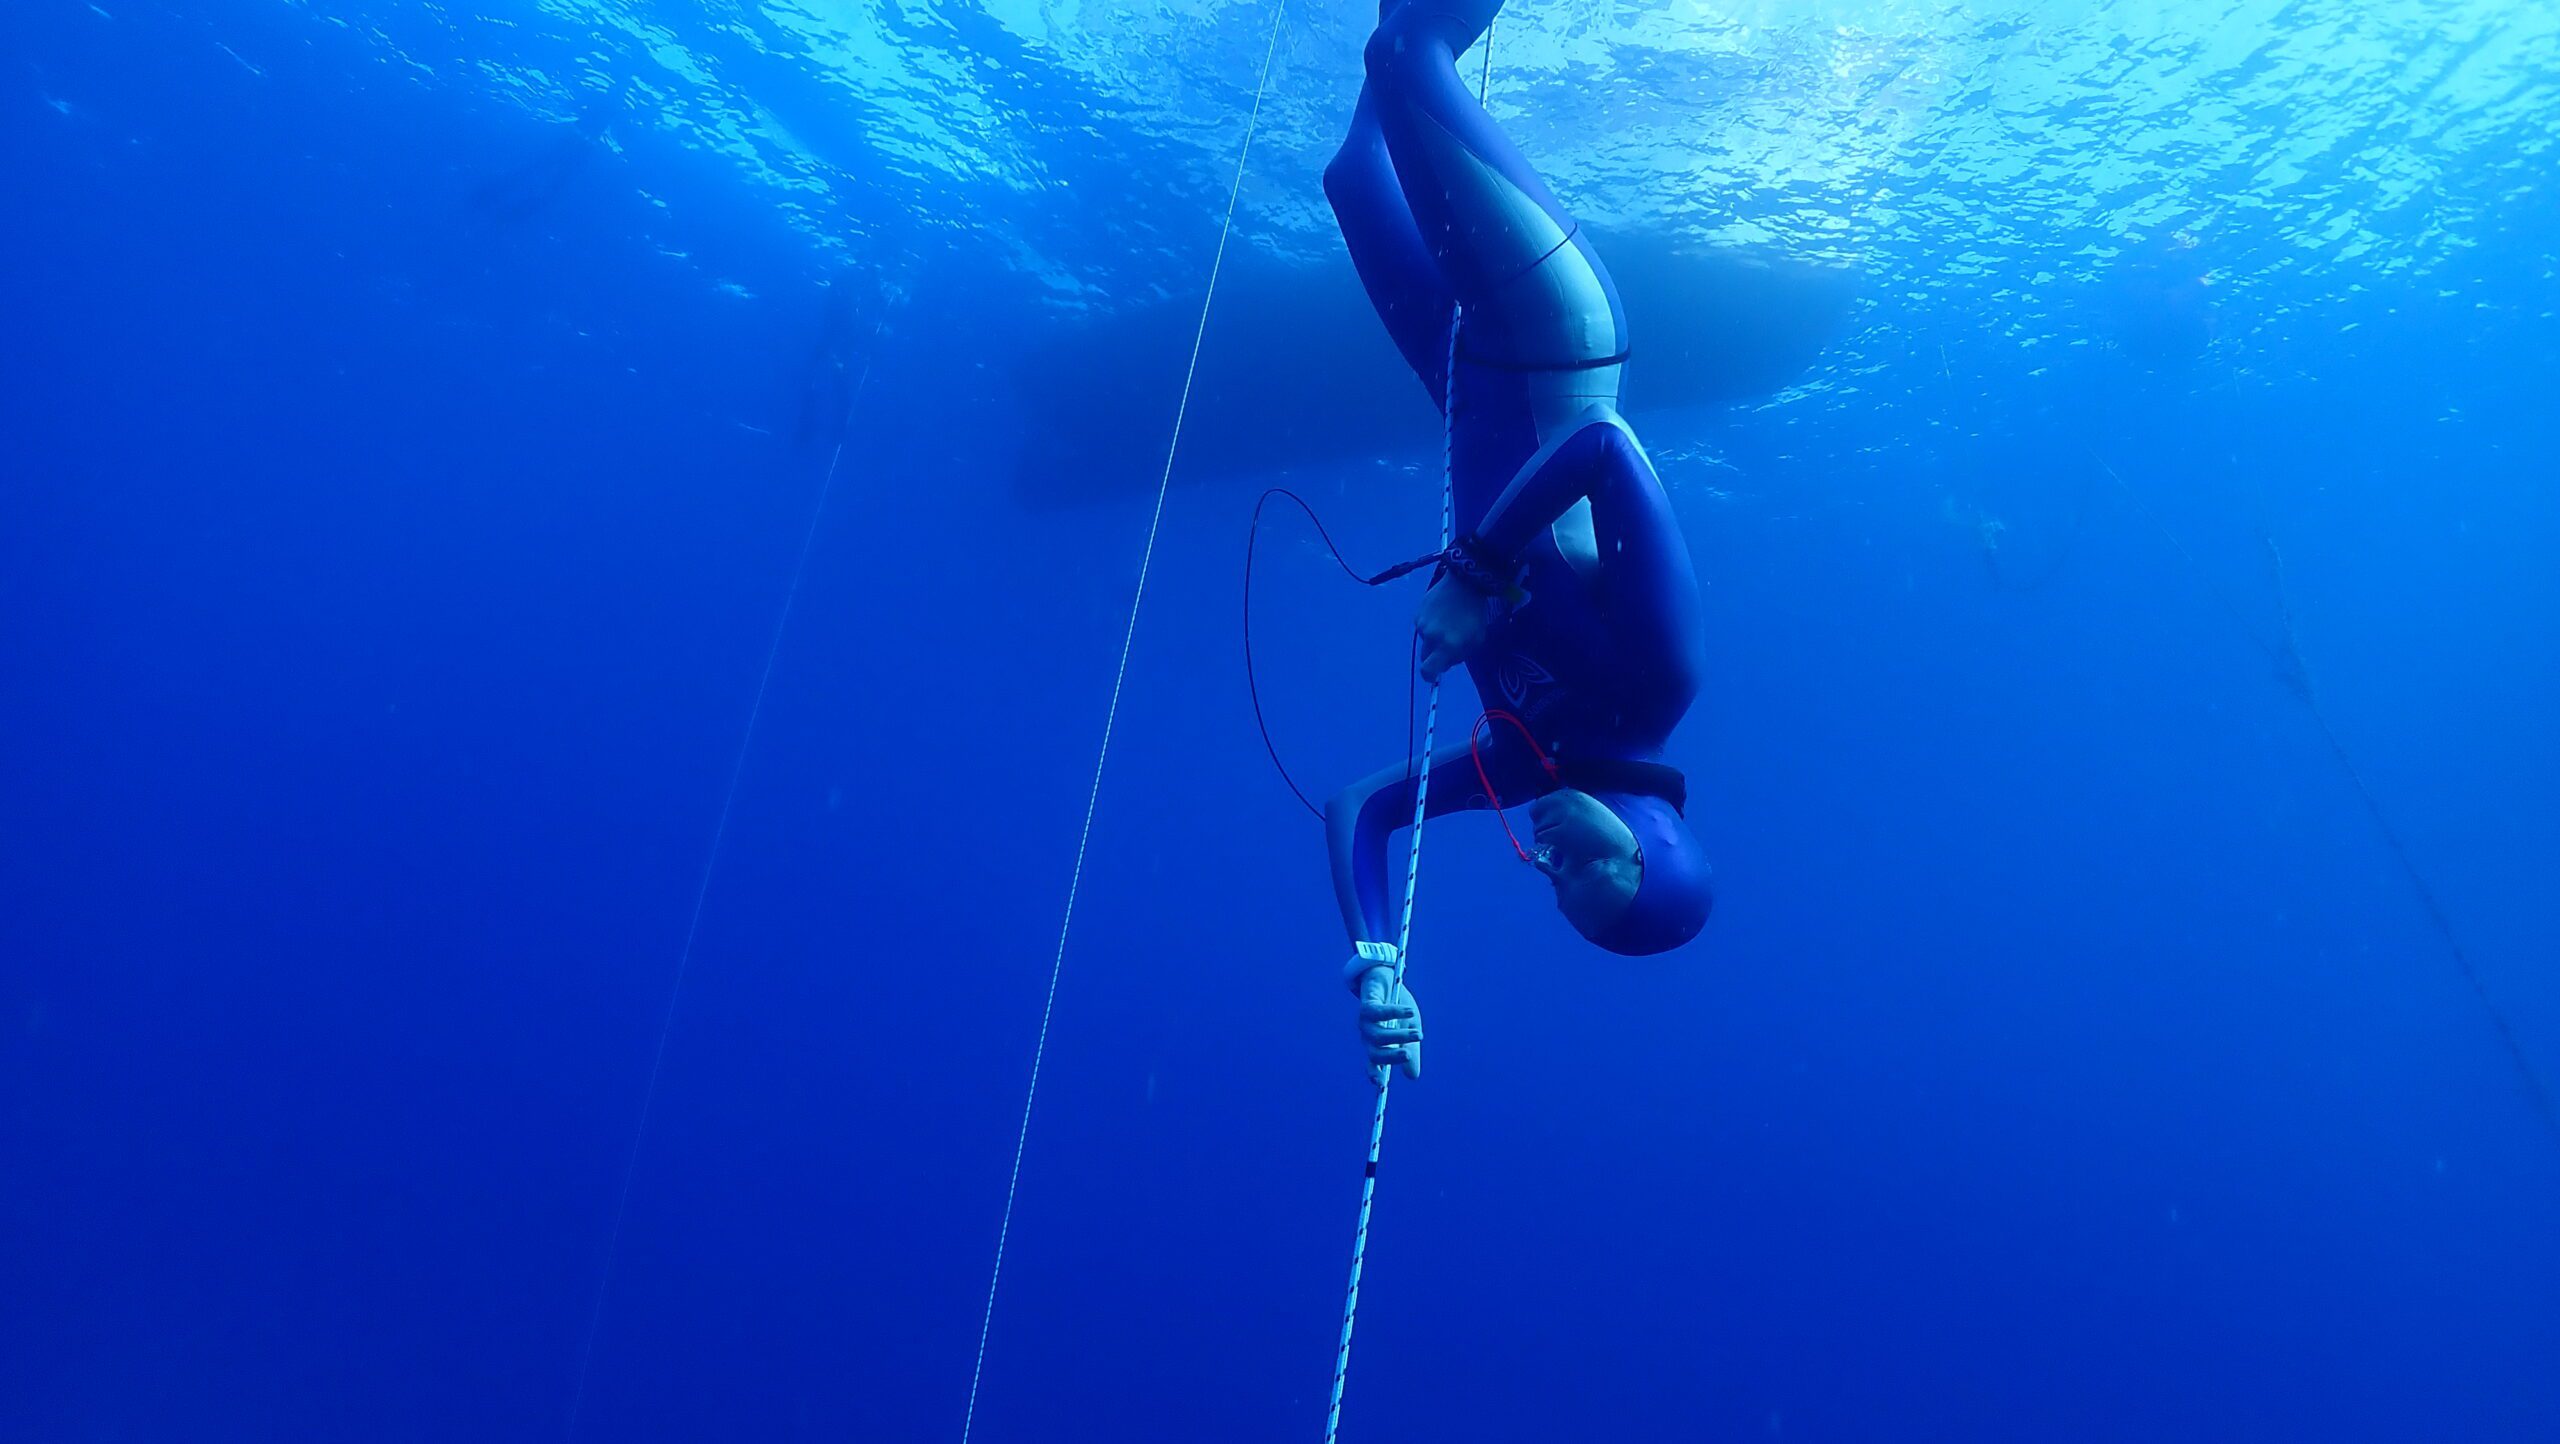 Psychology plays a significant role in freediving, as it involves understanding and managing the mental aspects of the sport. Freediving is a form of underwater diving that relies on breath-holding rather than using breathing apparatus. It requires a combination of physical skills, mental focus, and psychological resilience to perform well and stay safe in the water.